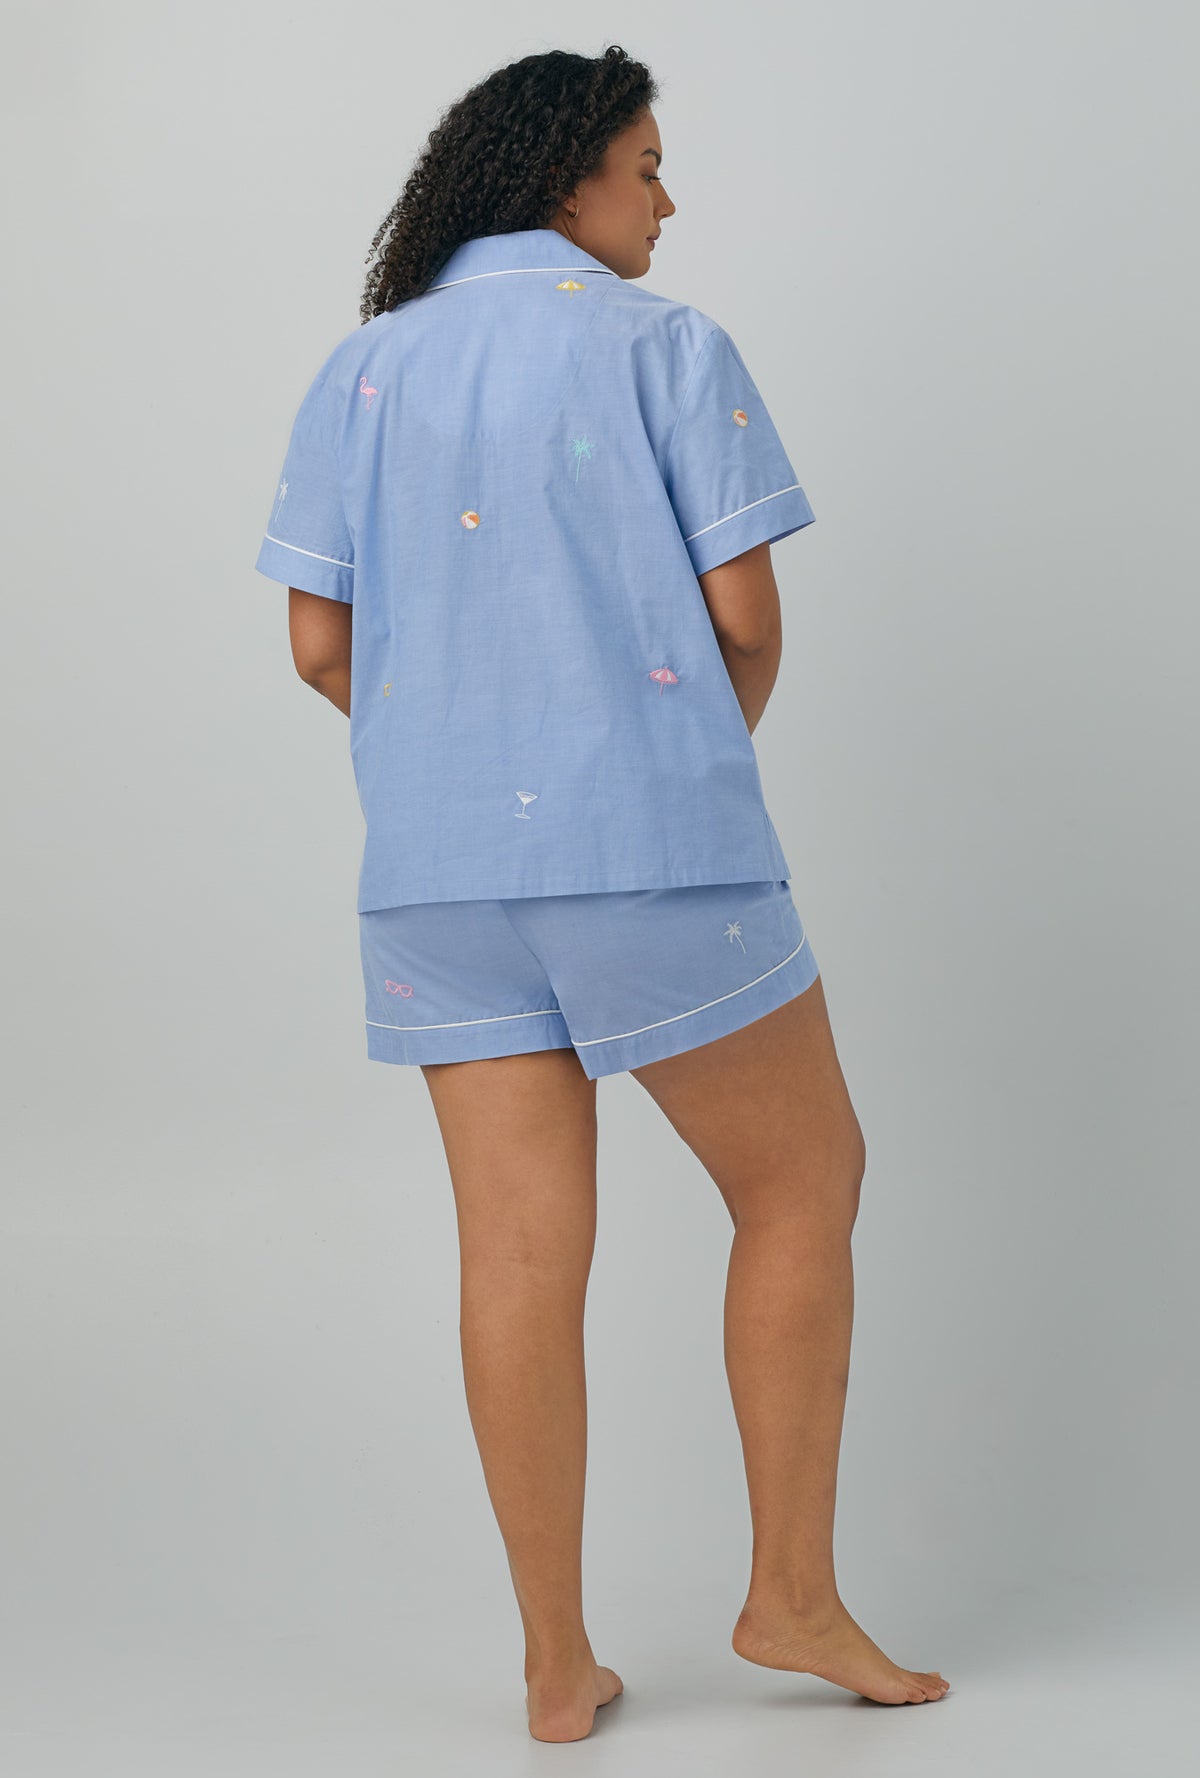 A lady wearing plus size blue Short Sleeve Classic Woven Cotton Poplin Shorty PJ Set with Chambray print